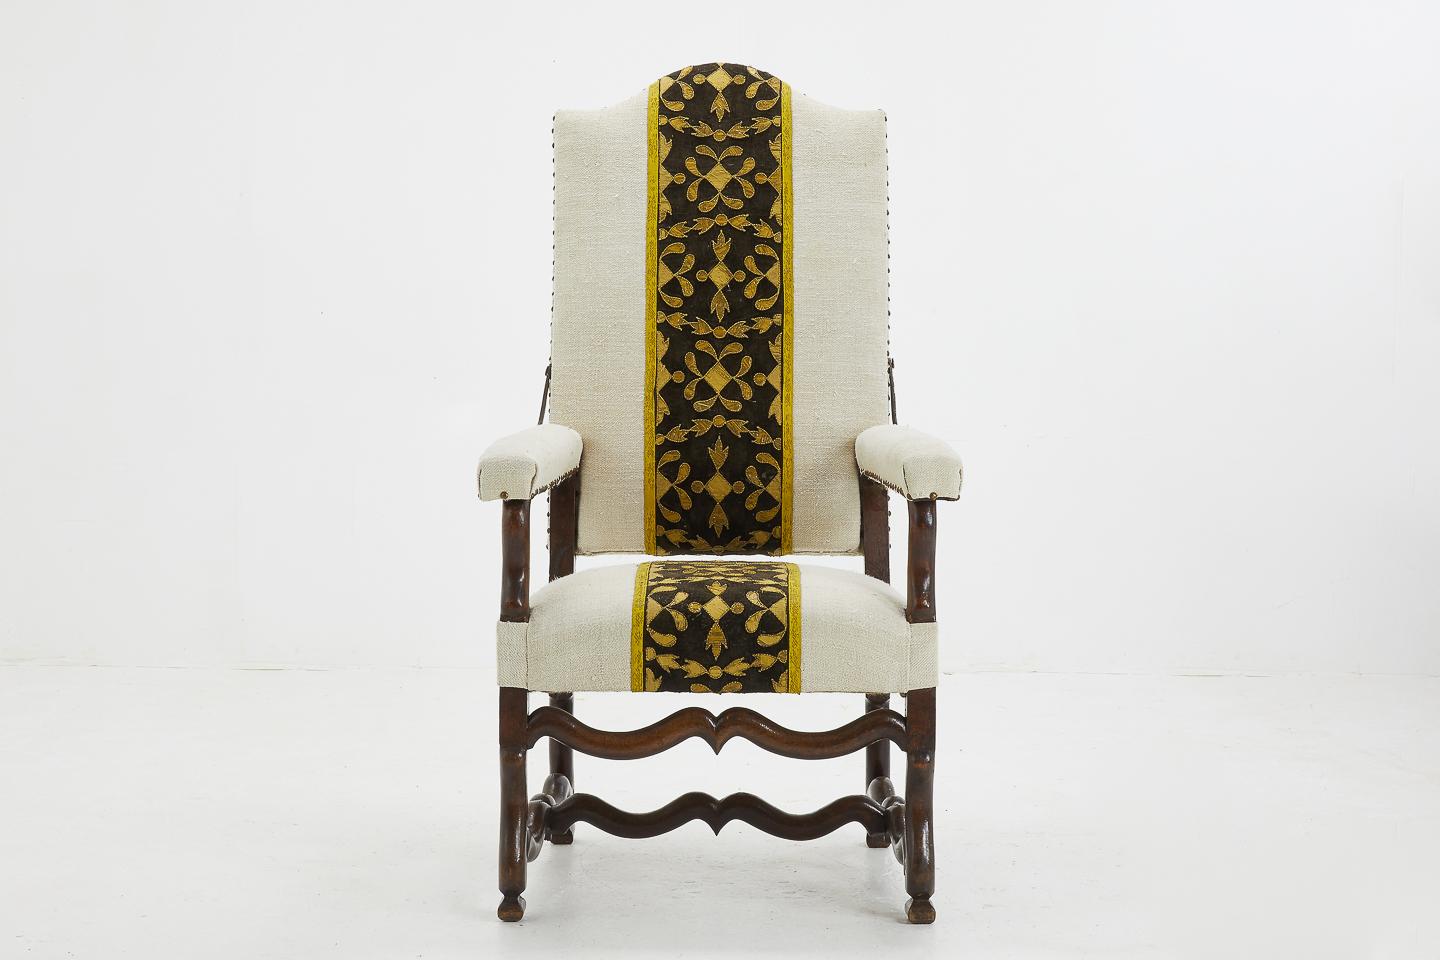 French 18th century walnut reclining armchair upholstered in antique fabric with an 18th century velvet panel with metal thread silk couching.
Measures:

Seat height: 50cm
Seat depth: 58cm.